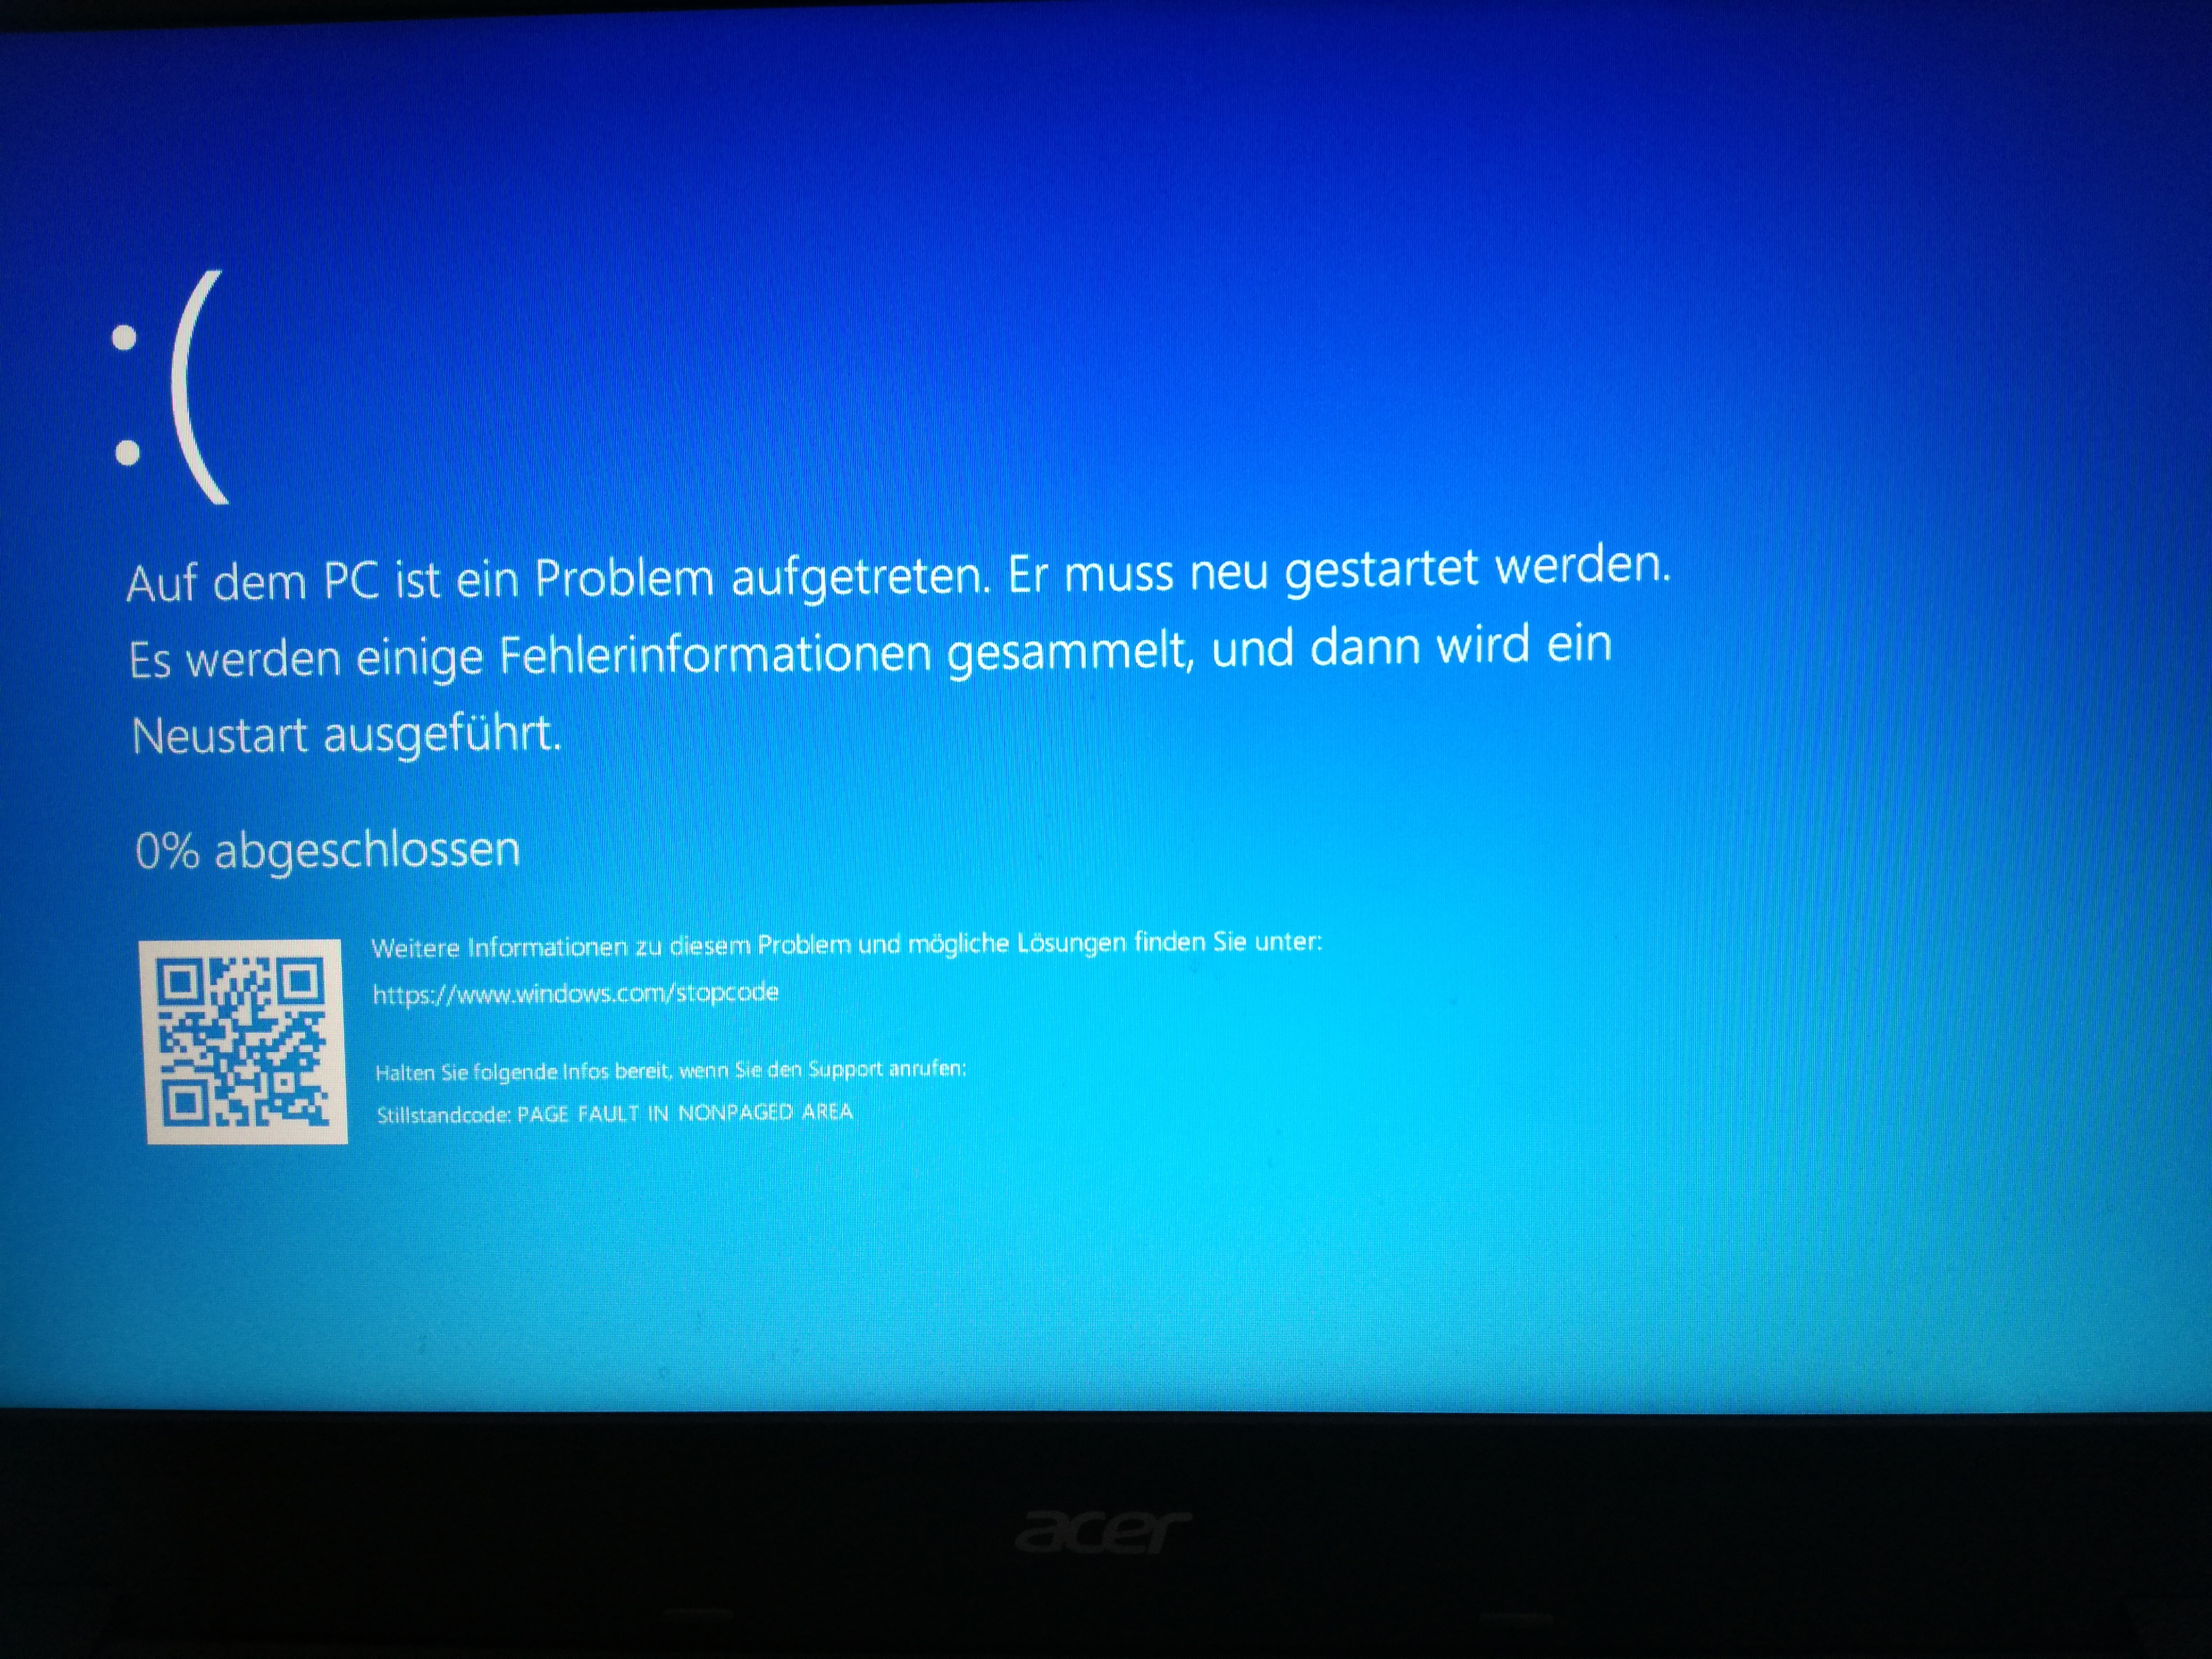 Windows Error PAGE FAULT IN NONPAGED AREA